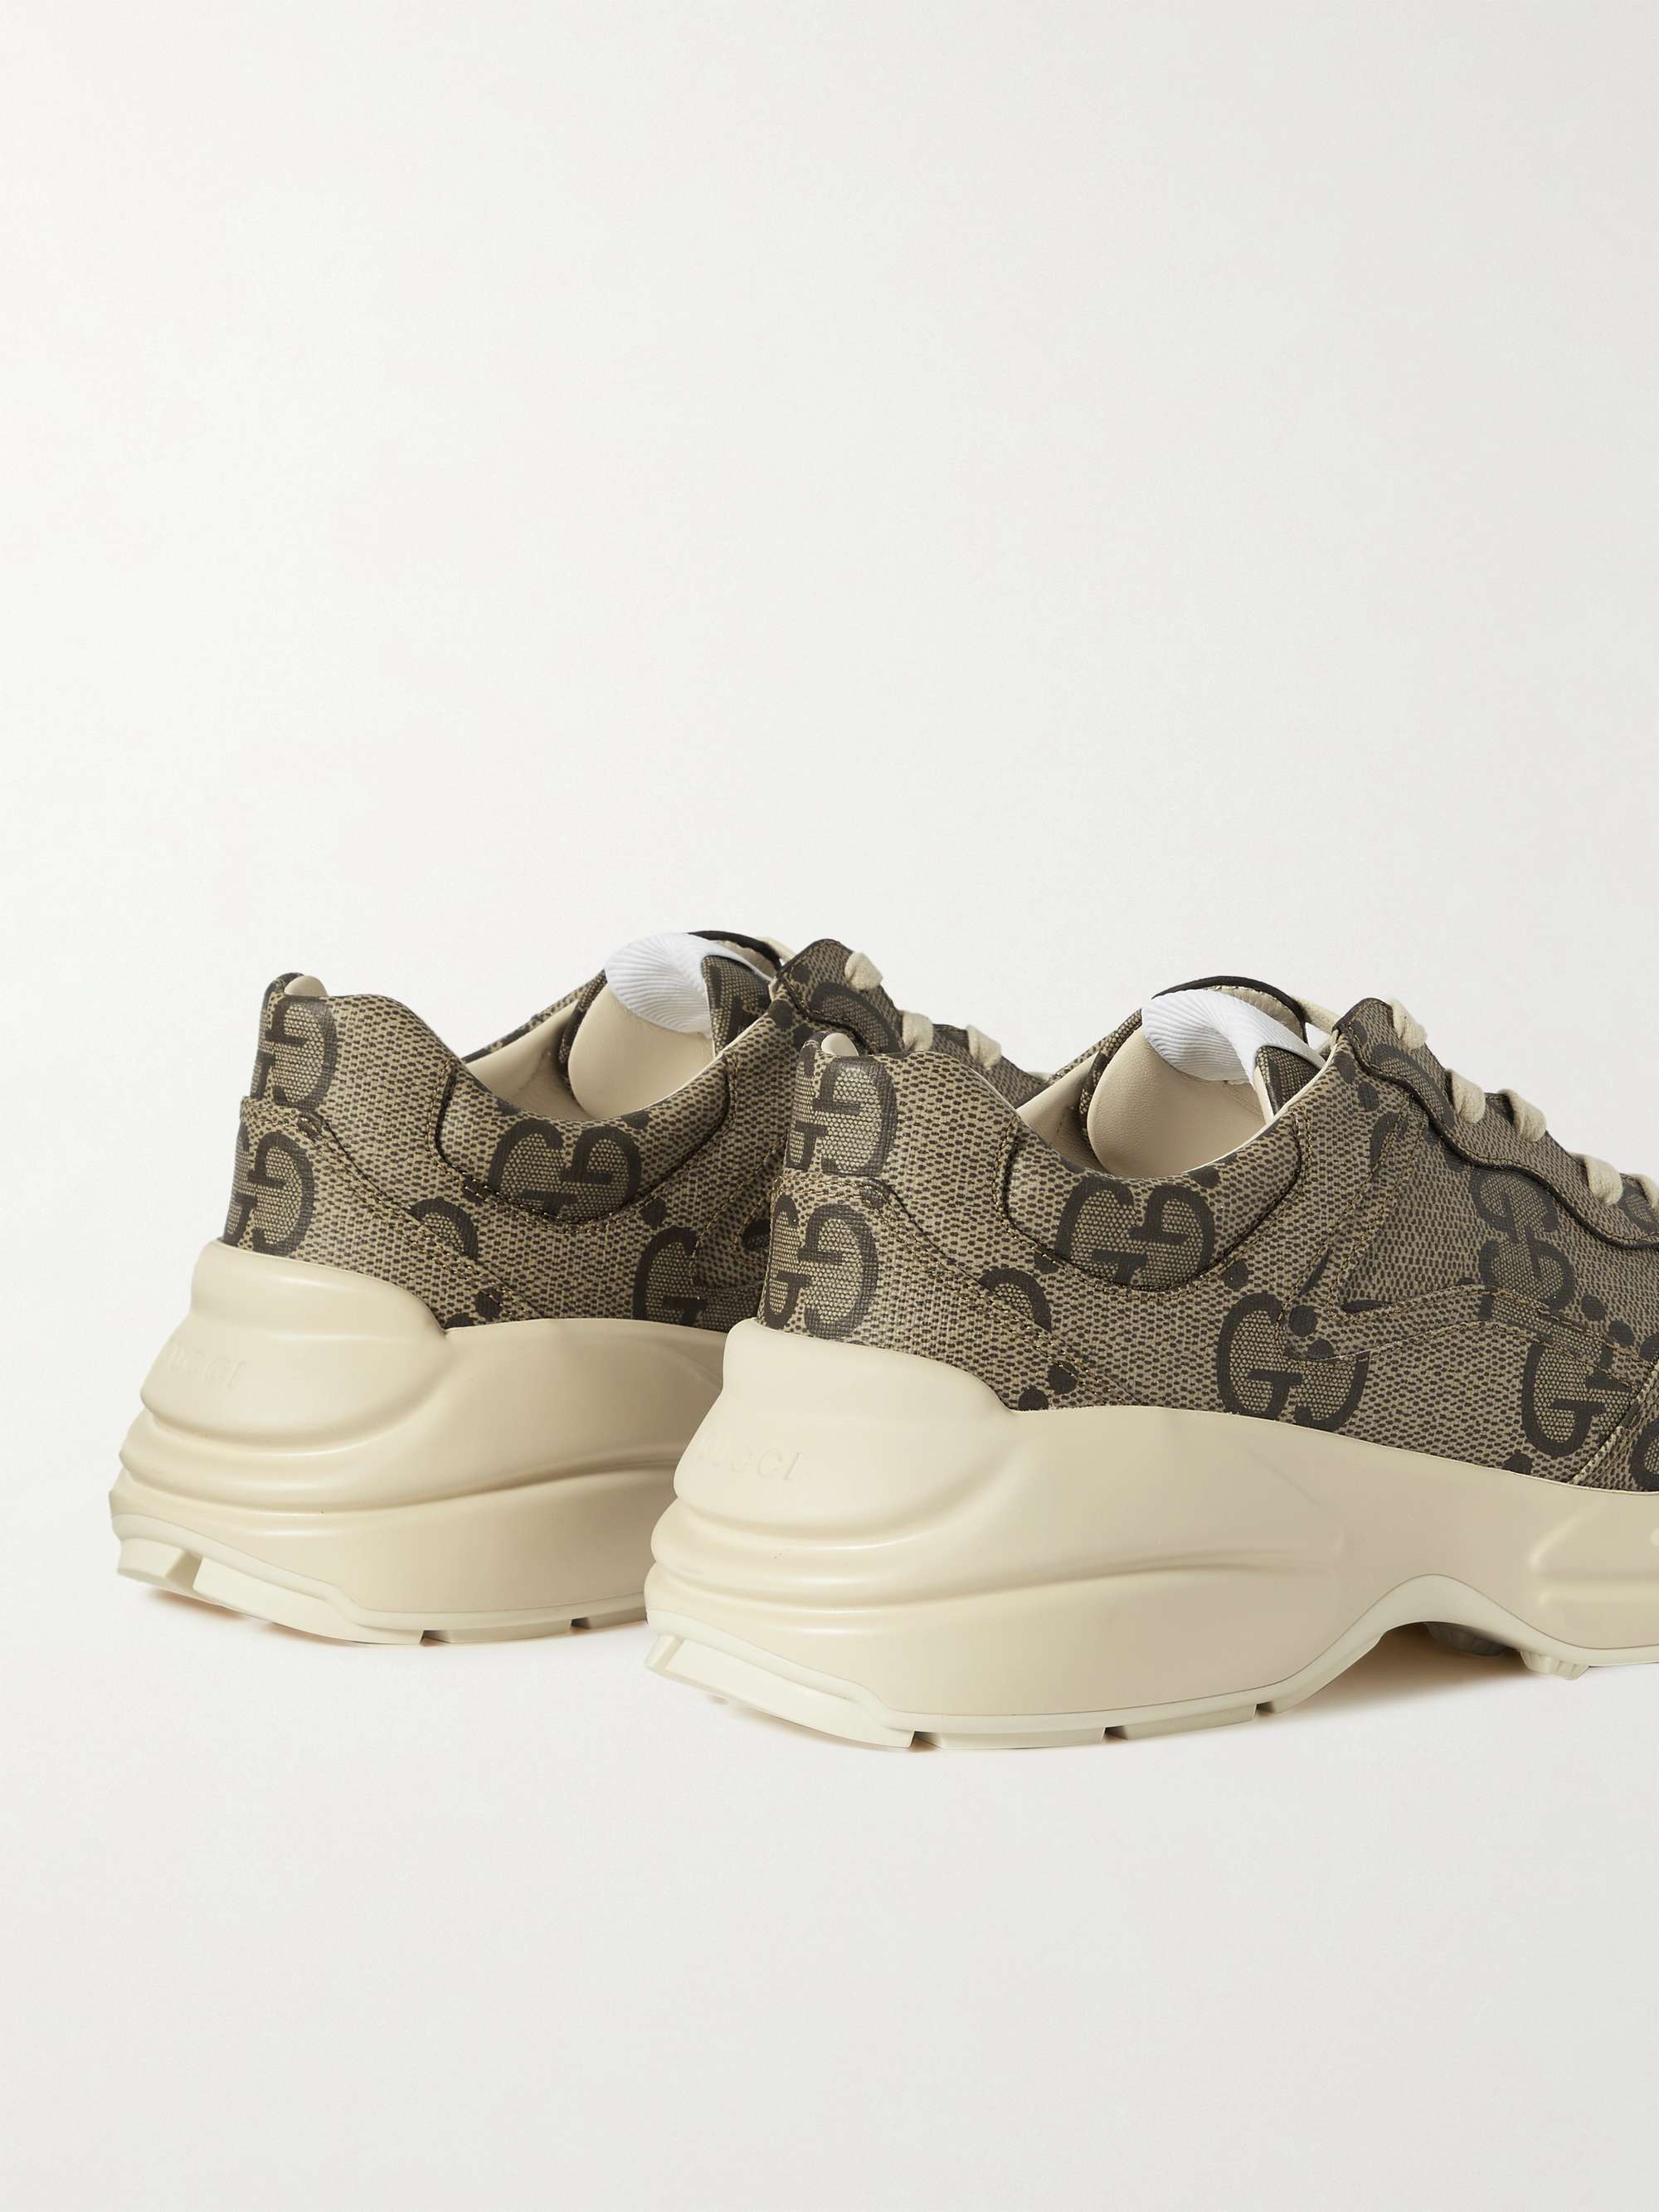 GUCCI Rhyton Monogrammed Canvas Sneakers